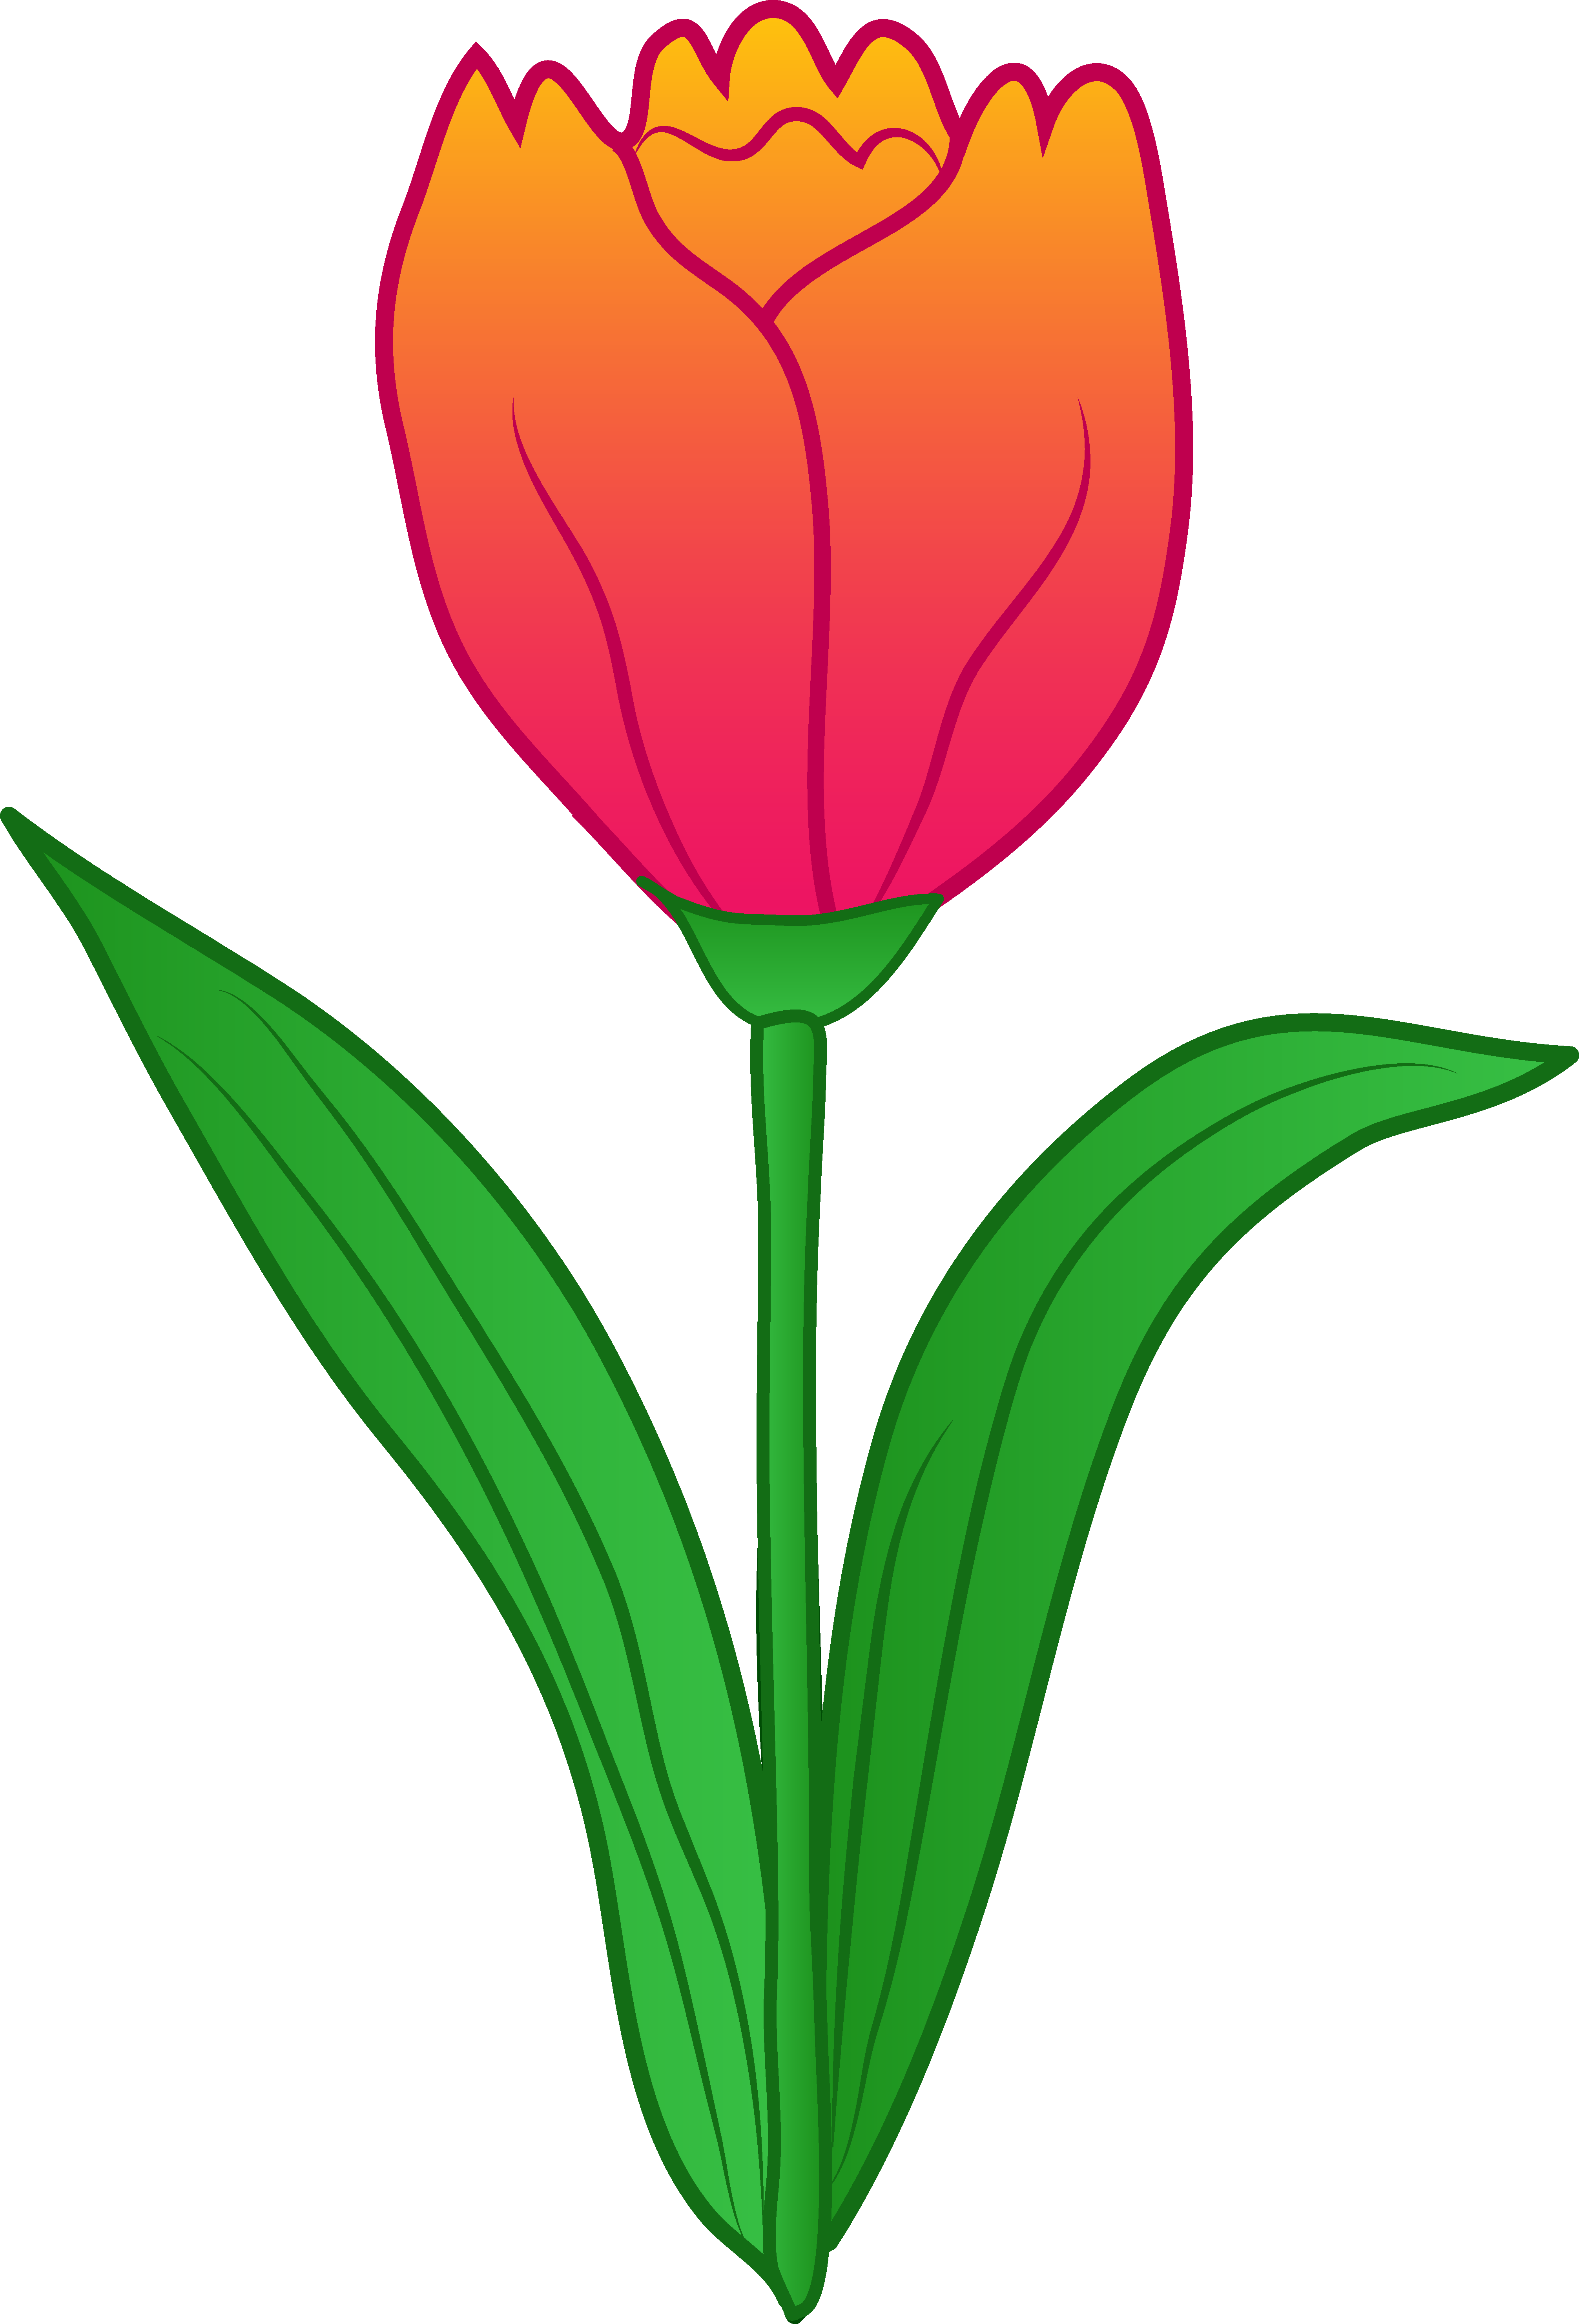 Tulip Flower Clip Art Free - Free Clipart Images